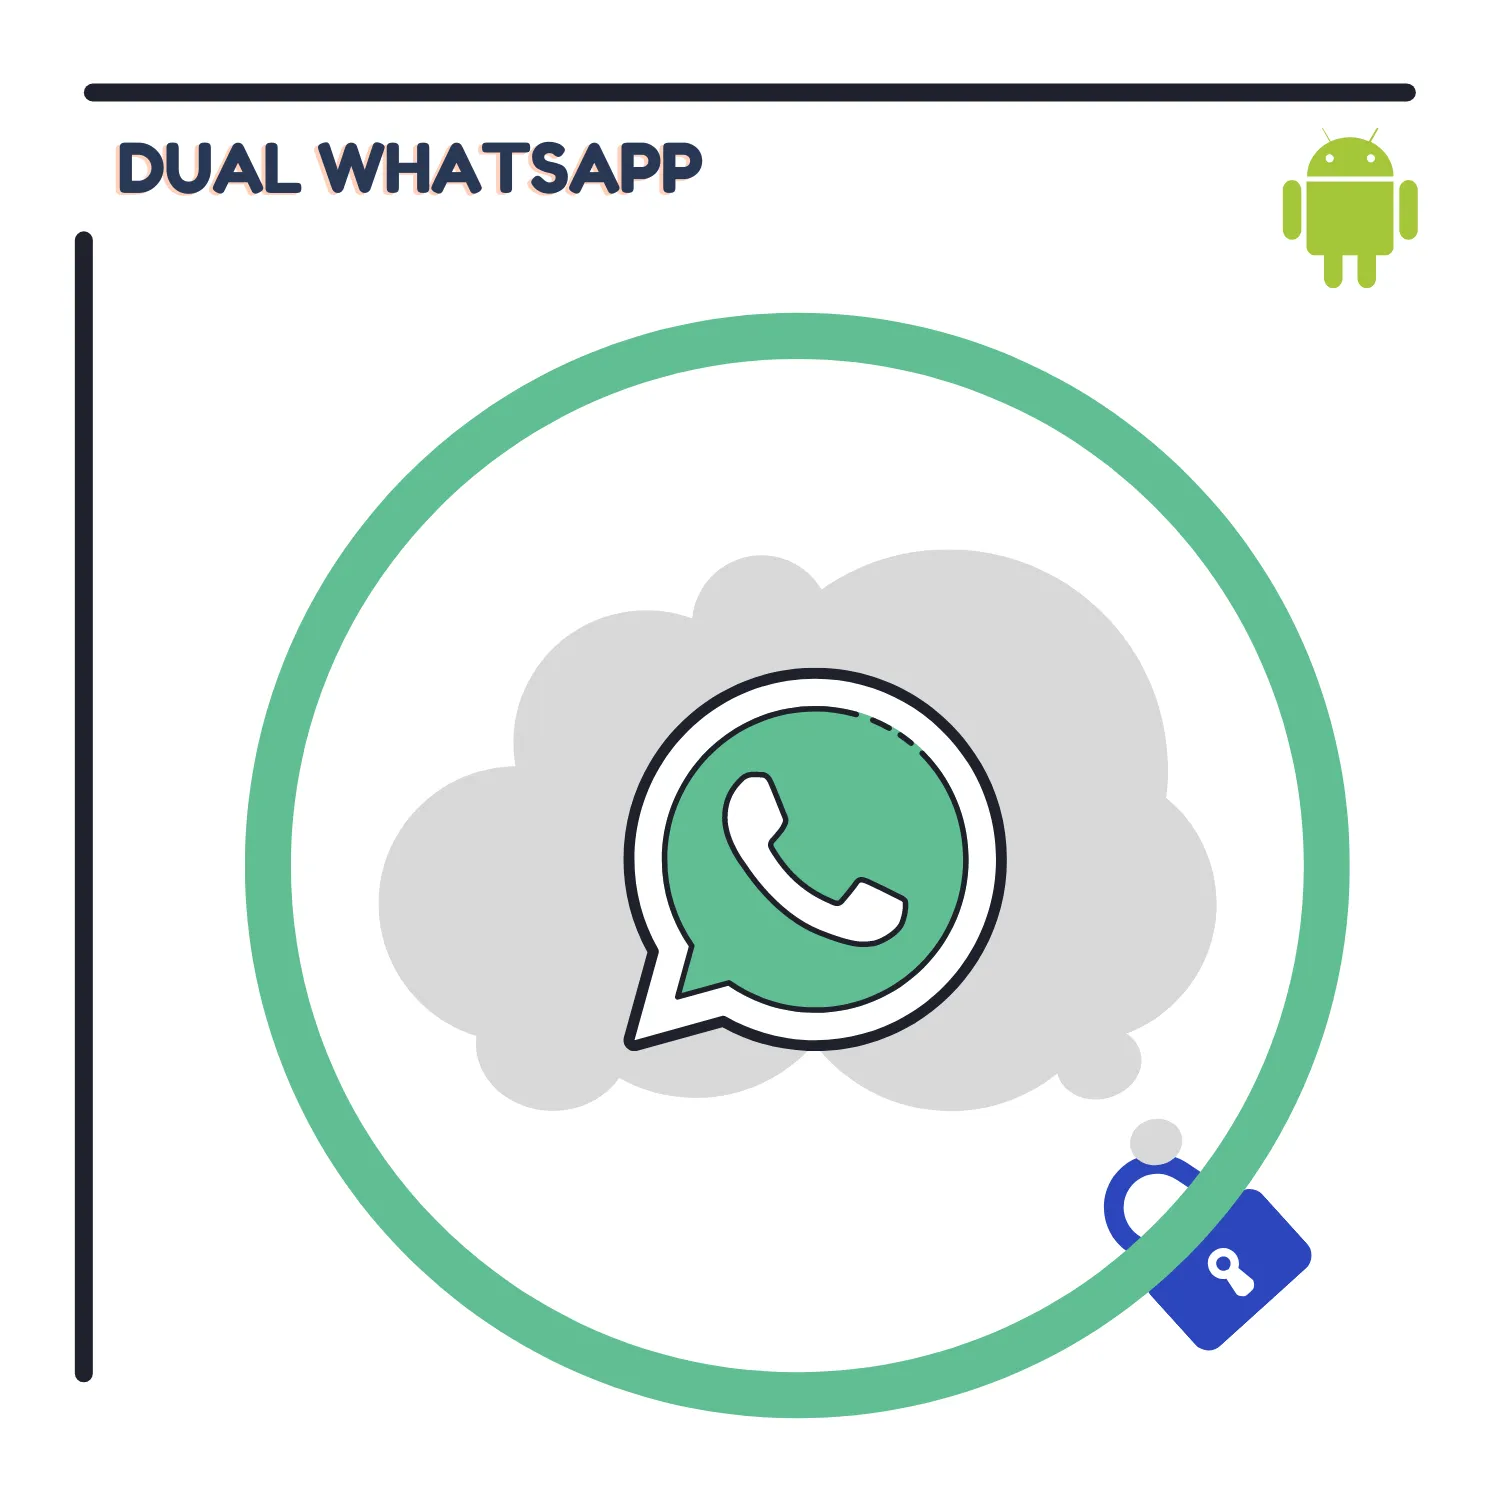 Use Dual WhatsApp on Android